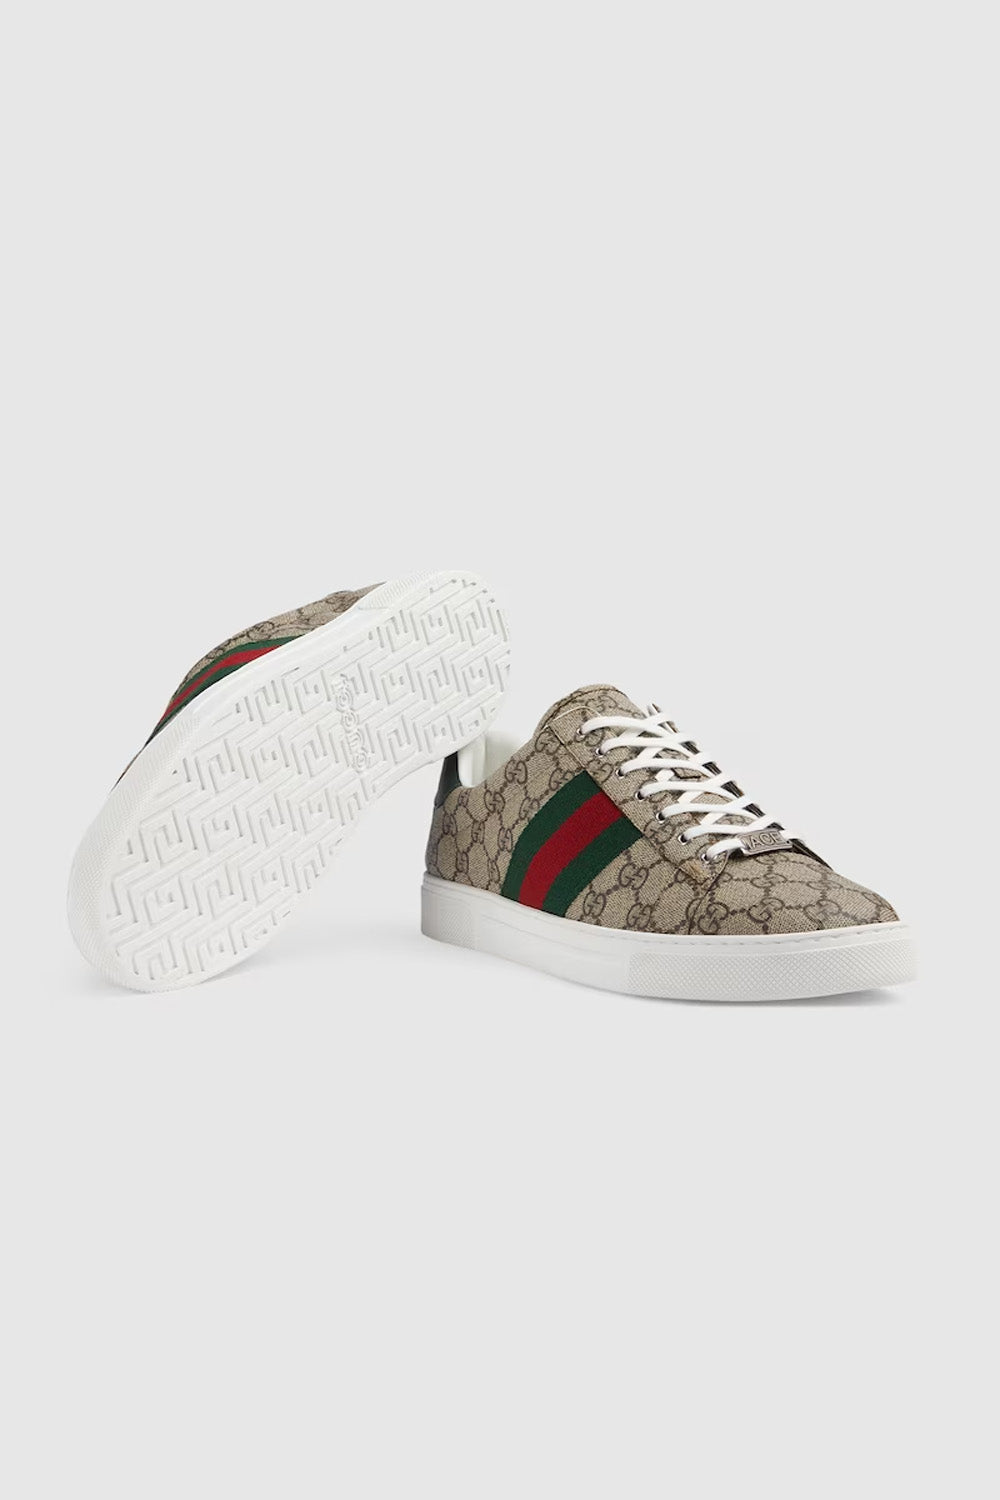 Gucci Men's Gucci Ace Trainer With Web